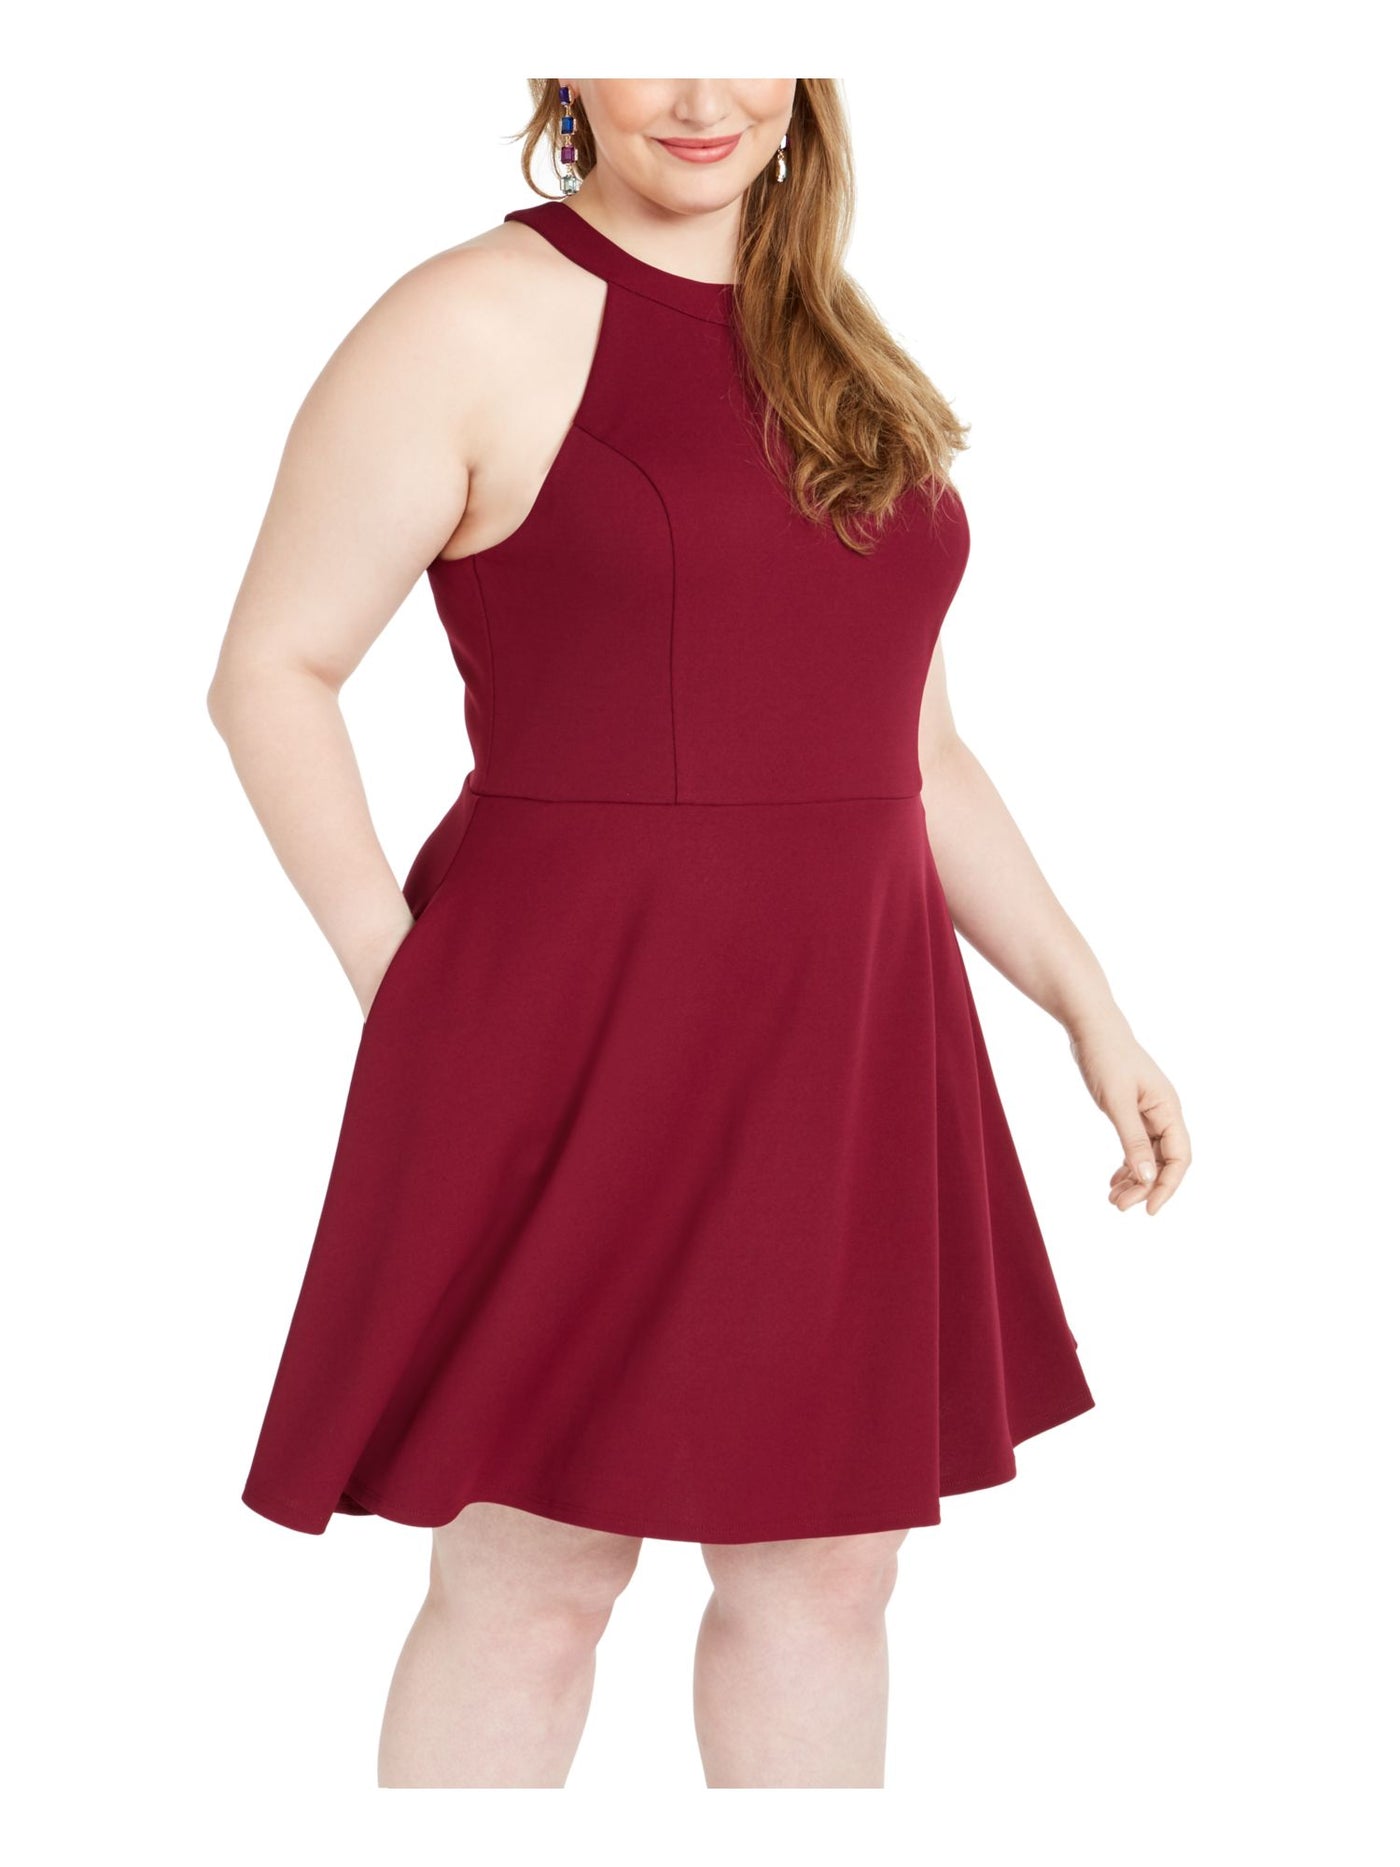 SPEECHLESS Womens Burgundy Cut Out Bowtie Sleeveless Halter Above The Knee Fit + Flare Dress 24